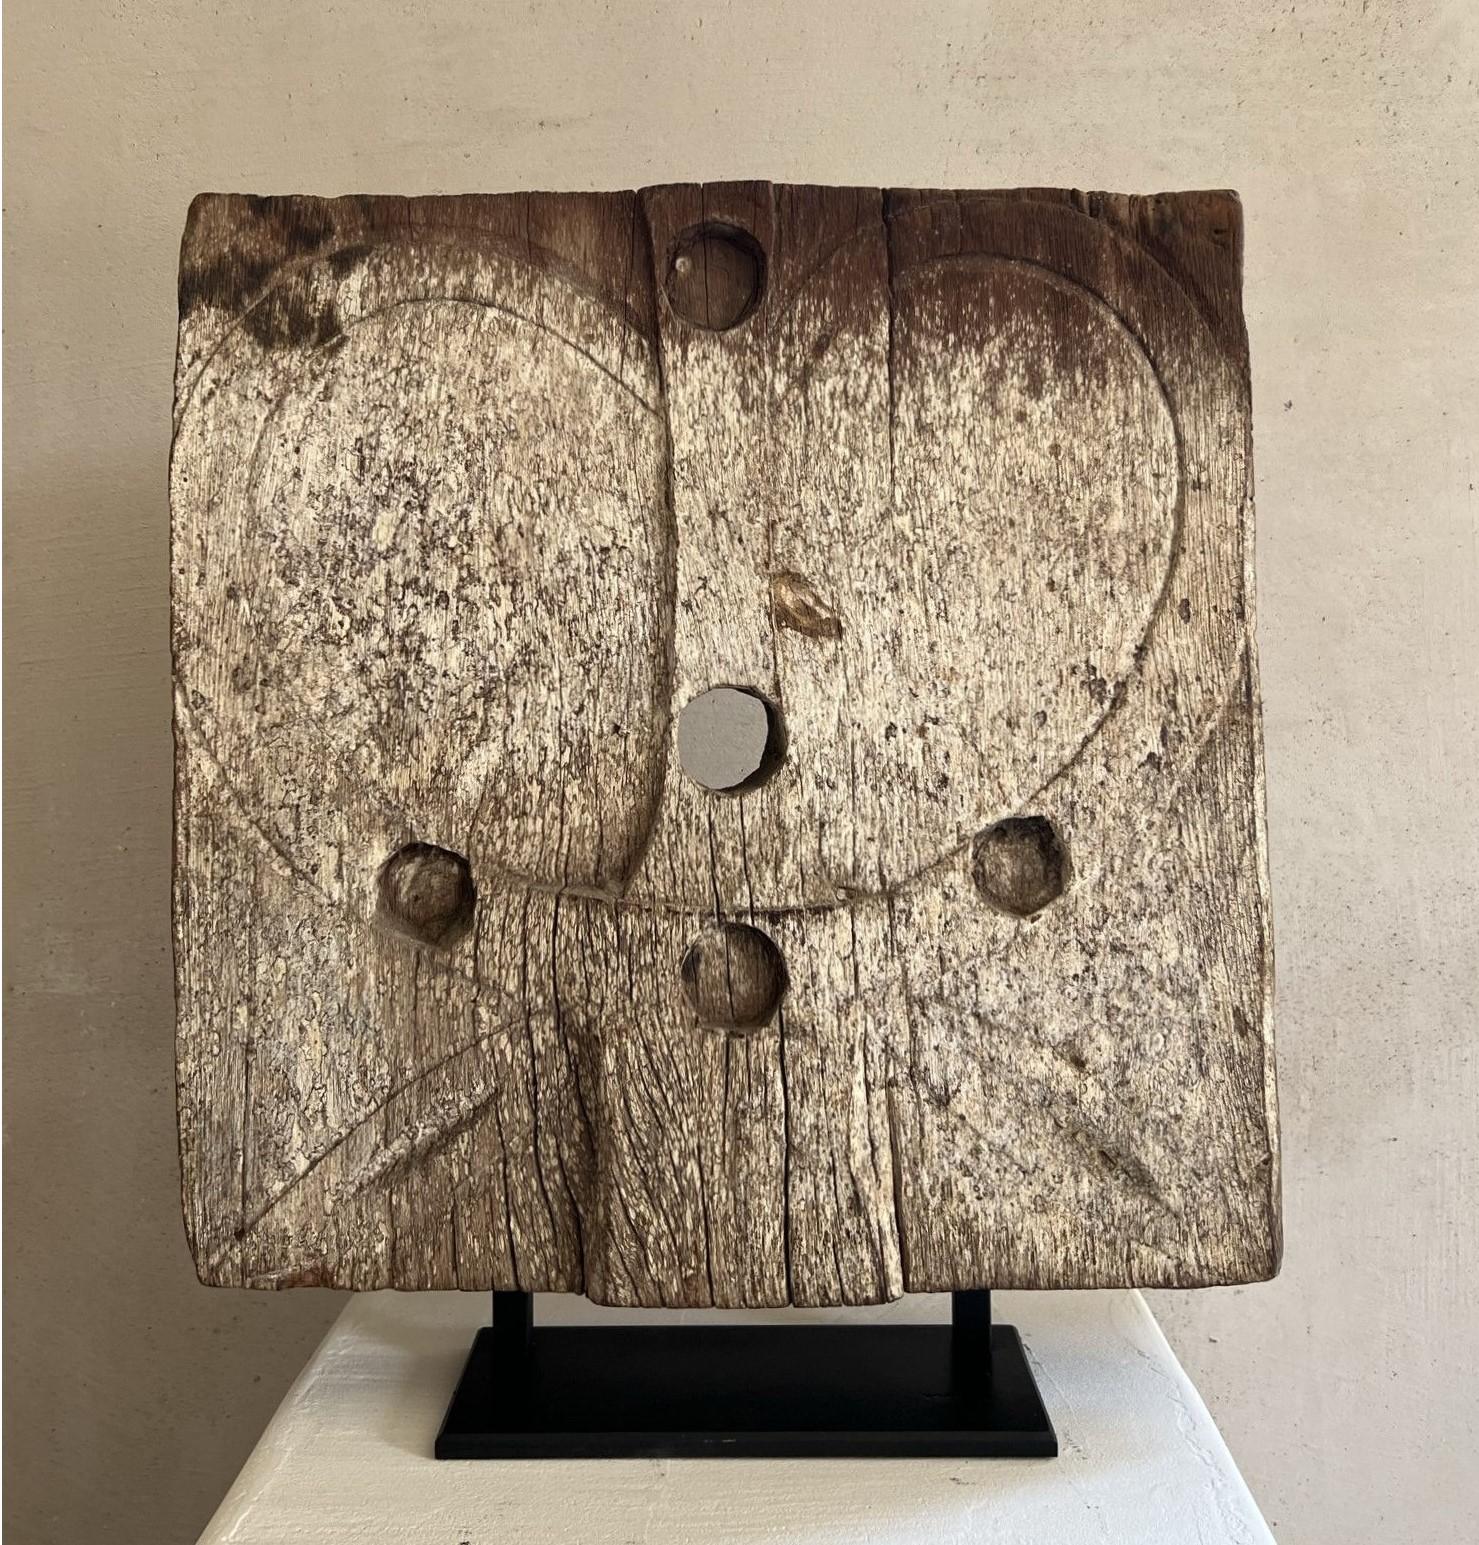 Sulawesi, Toraja, a wooden stylized sculpture of a ox head with original patina,
For the Indonesioan Toraja people the ox is a sacred animal. Depictions of the animal were believed to be a protection against bad energy. This particular sculpture